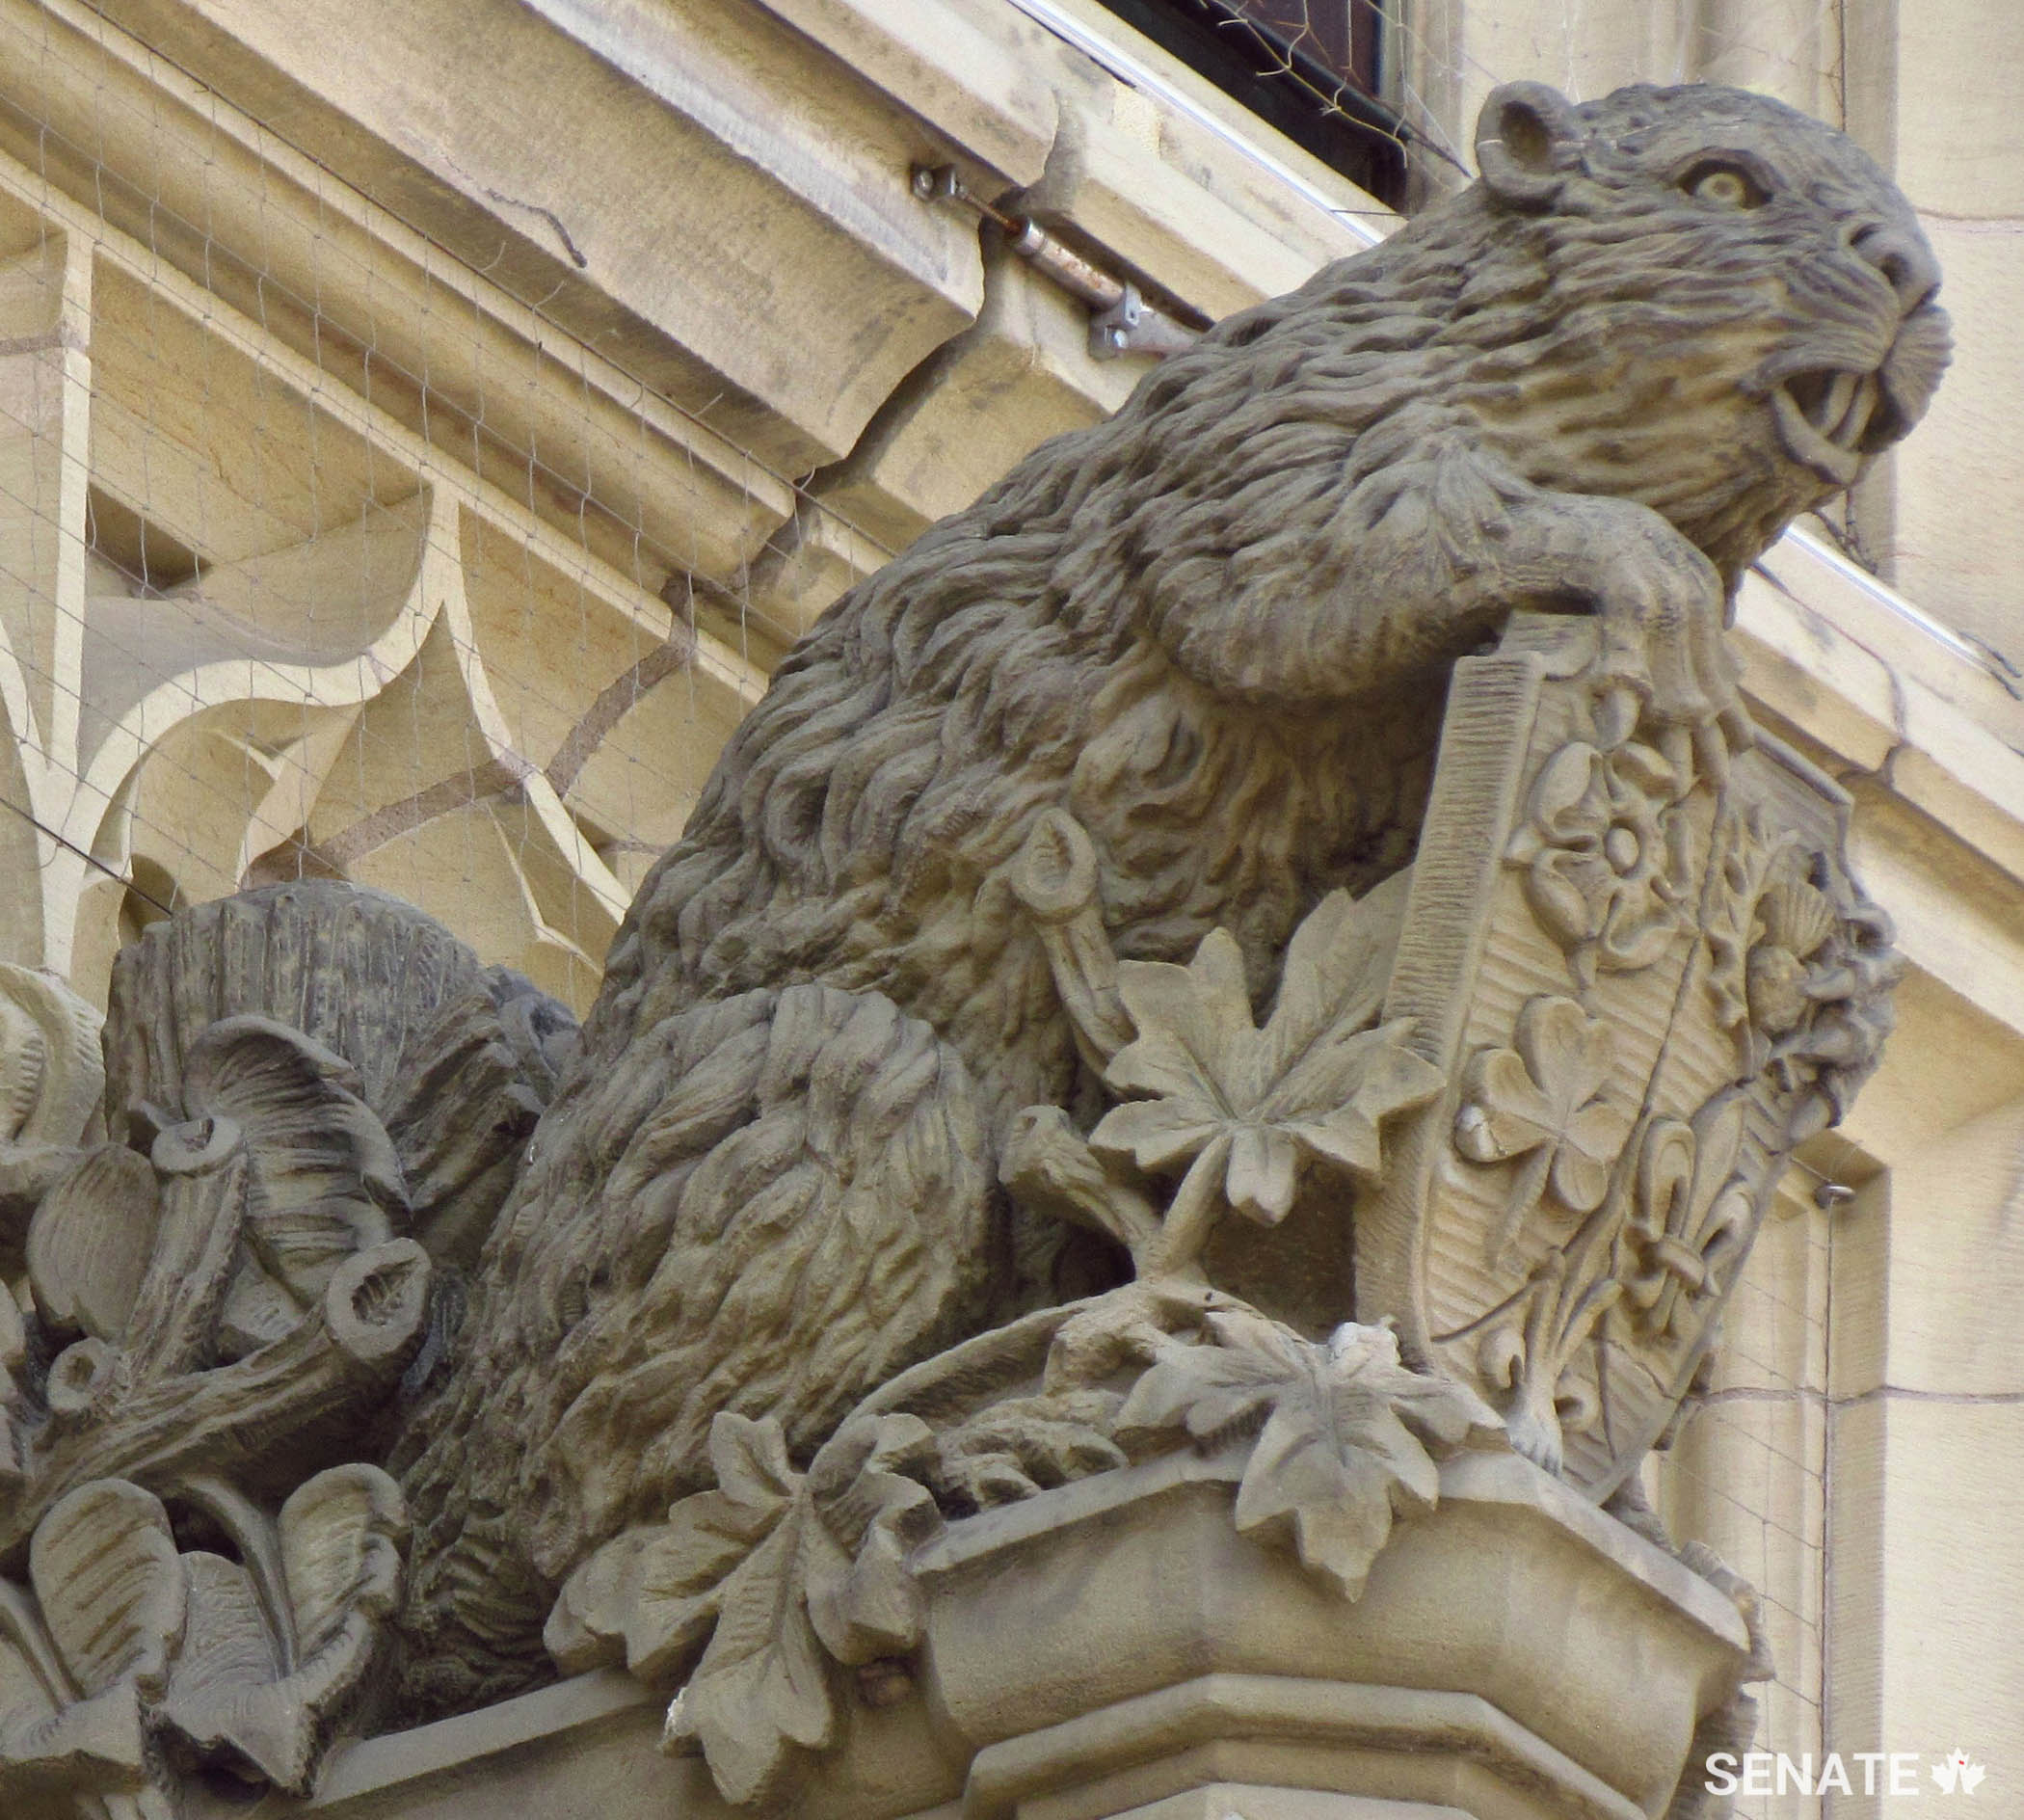 A shield-bearing beaver stands sentinel over the Peace Tower entranceway. The original design for the sculpture created a storm of controversy when it was unveiled in 1937.